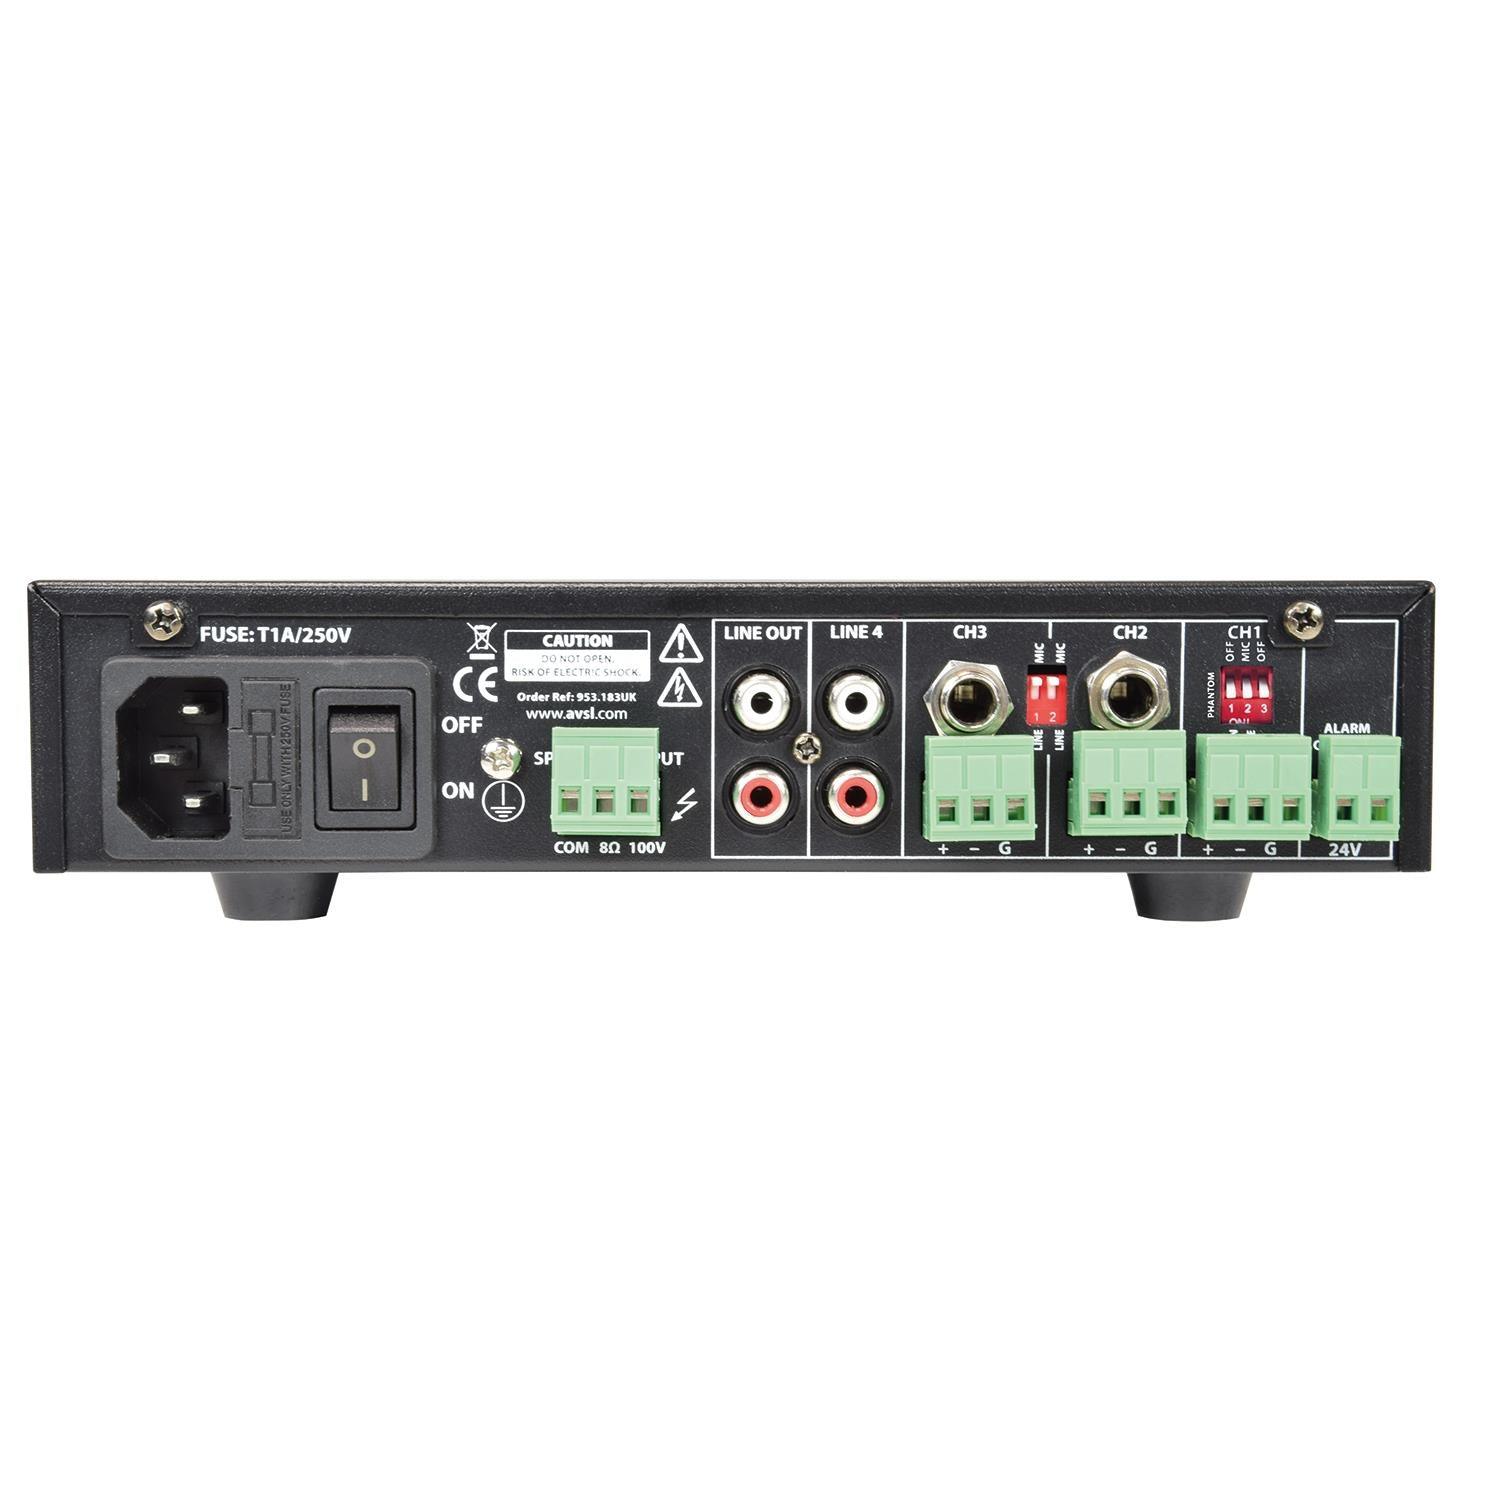 Adastra UA60 60w Compact 5 Channel 100V Mixer Amp - DY Pro Audio